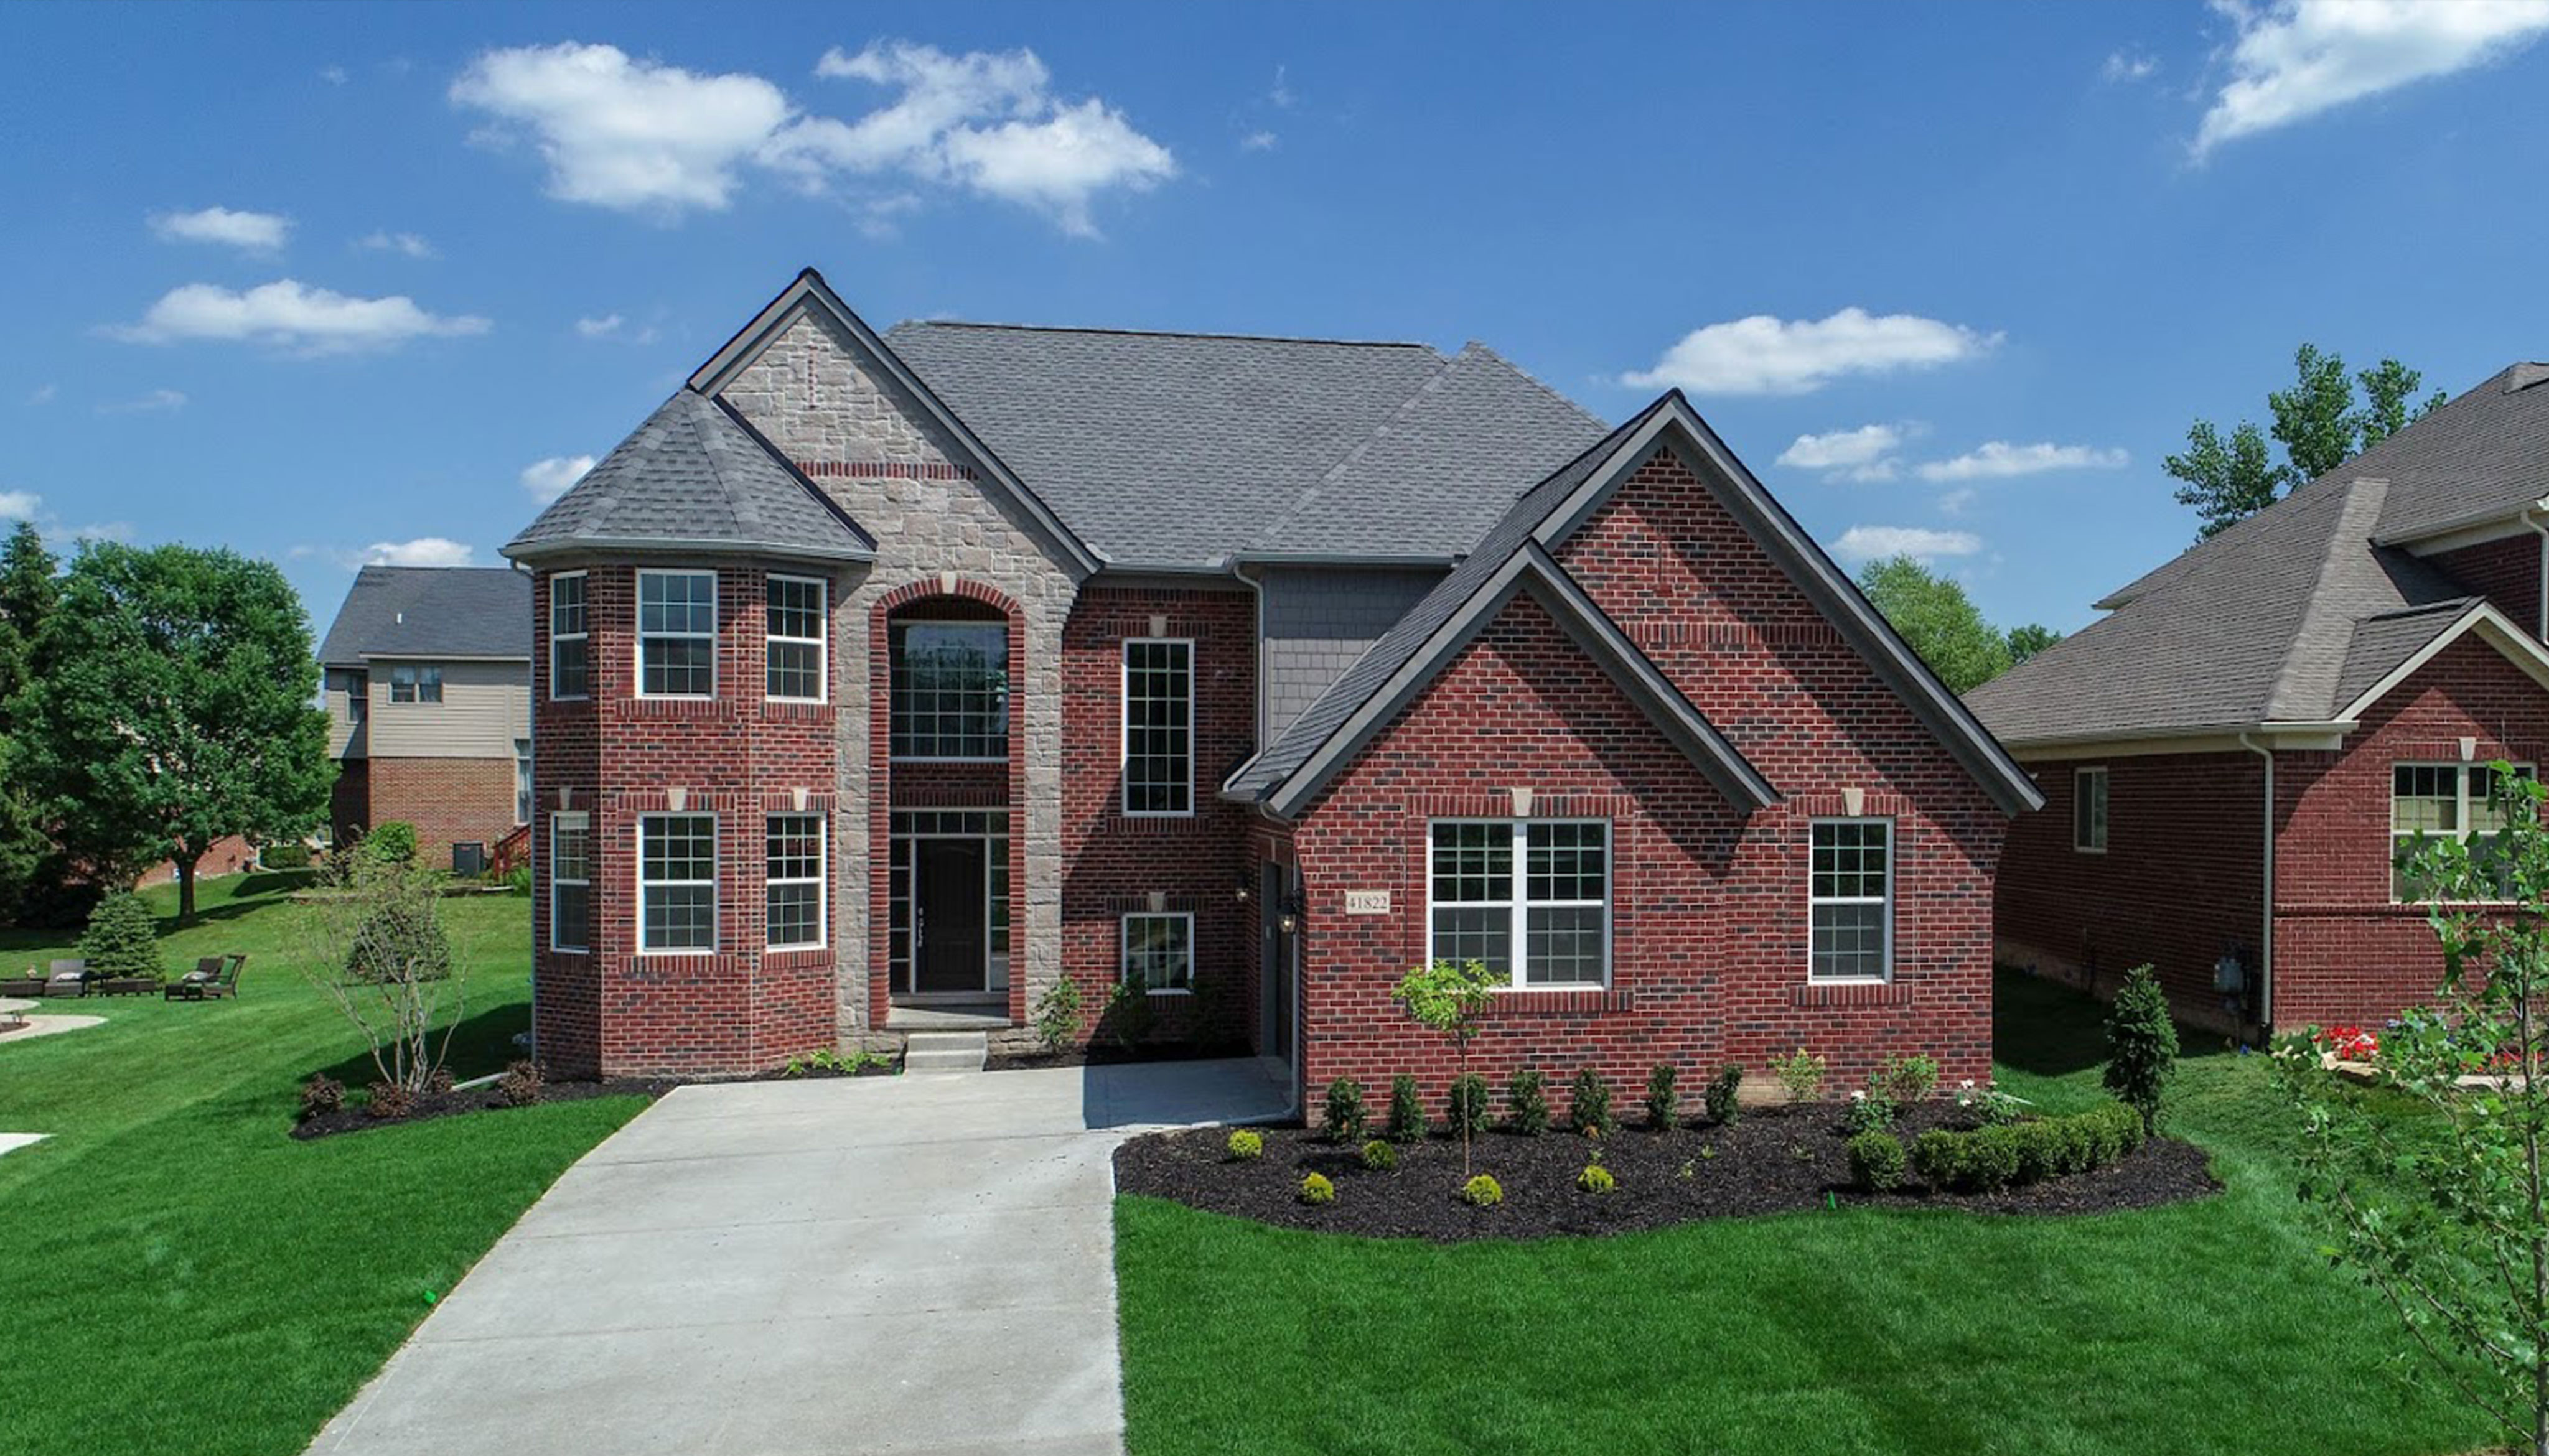 Contact Singh Homes if you're considering buying a new construction home in Novi, Michigan.